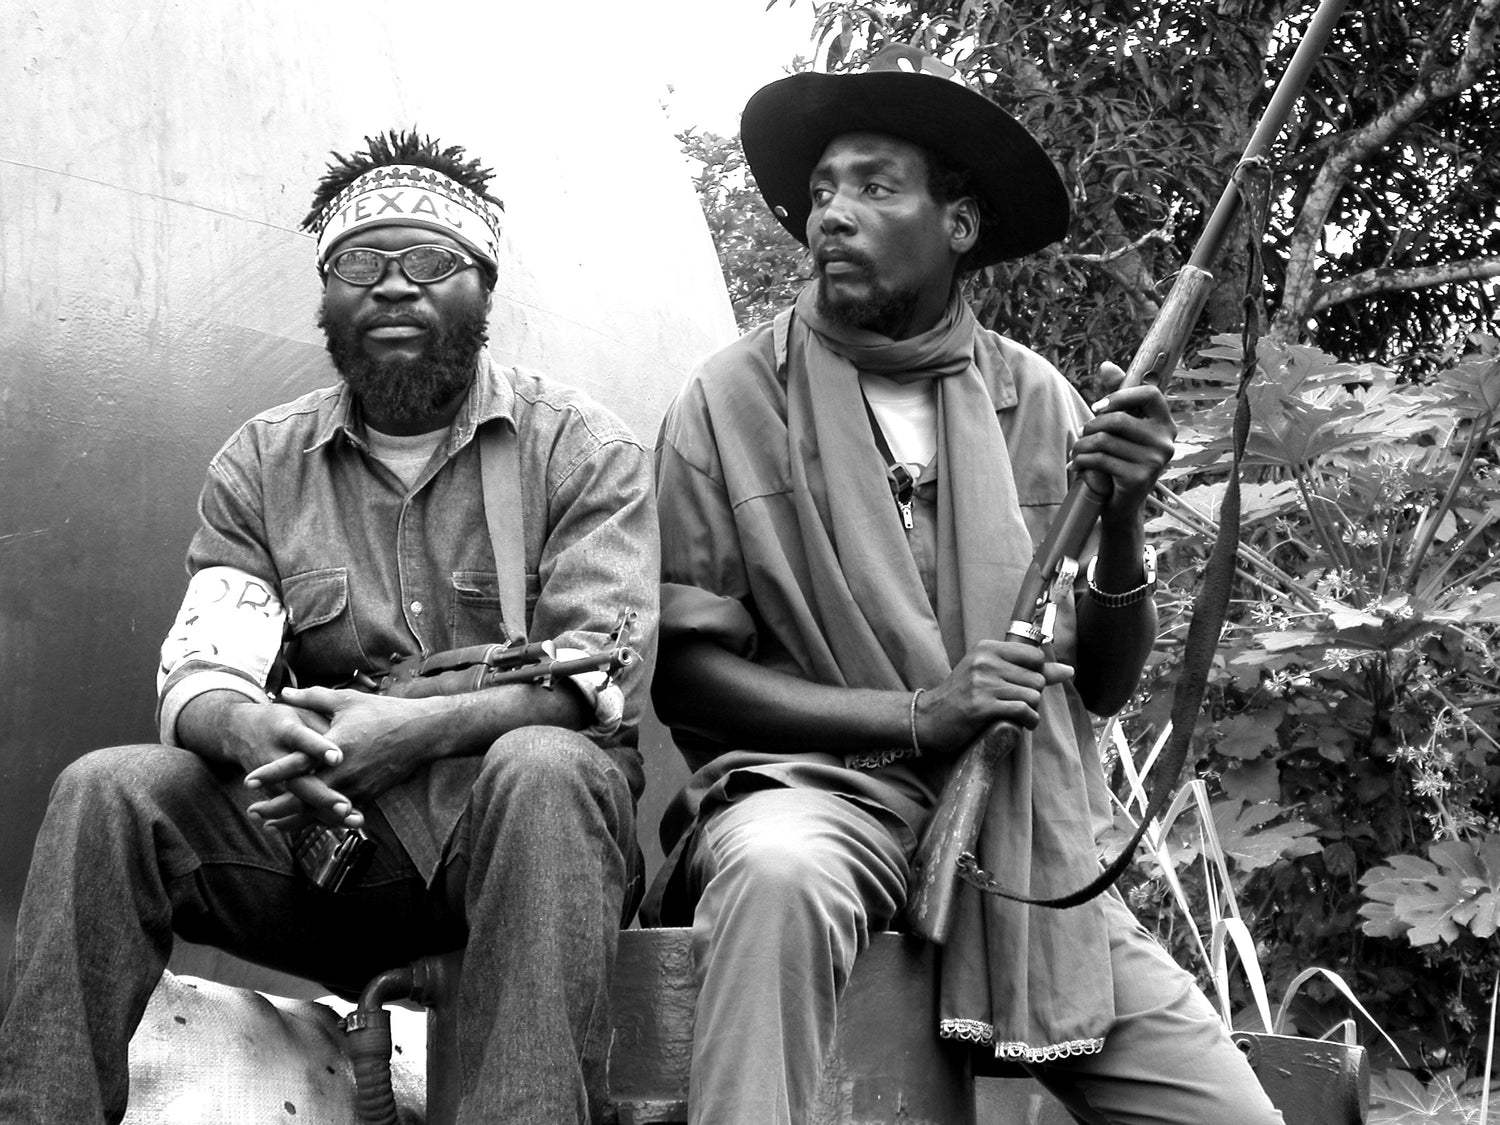 'Ninja' rebel soldiers in the Poole region of Congo Brazzaville during a period of civil war